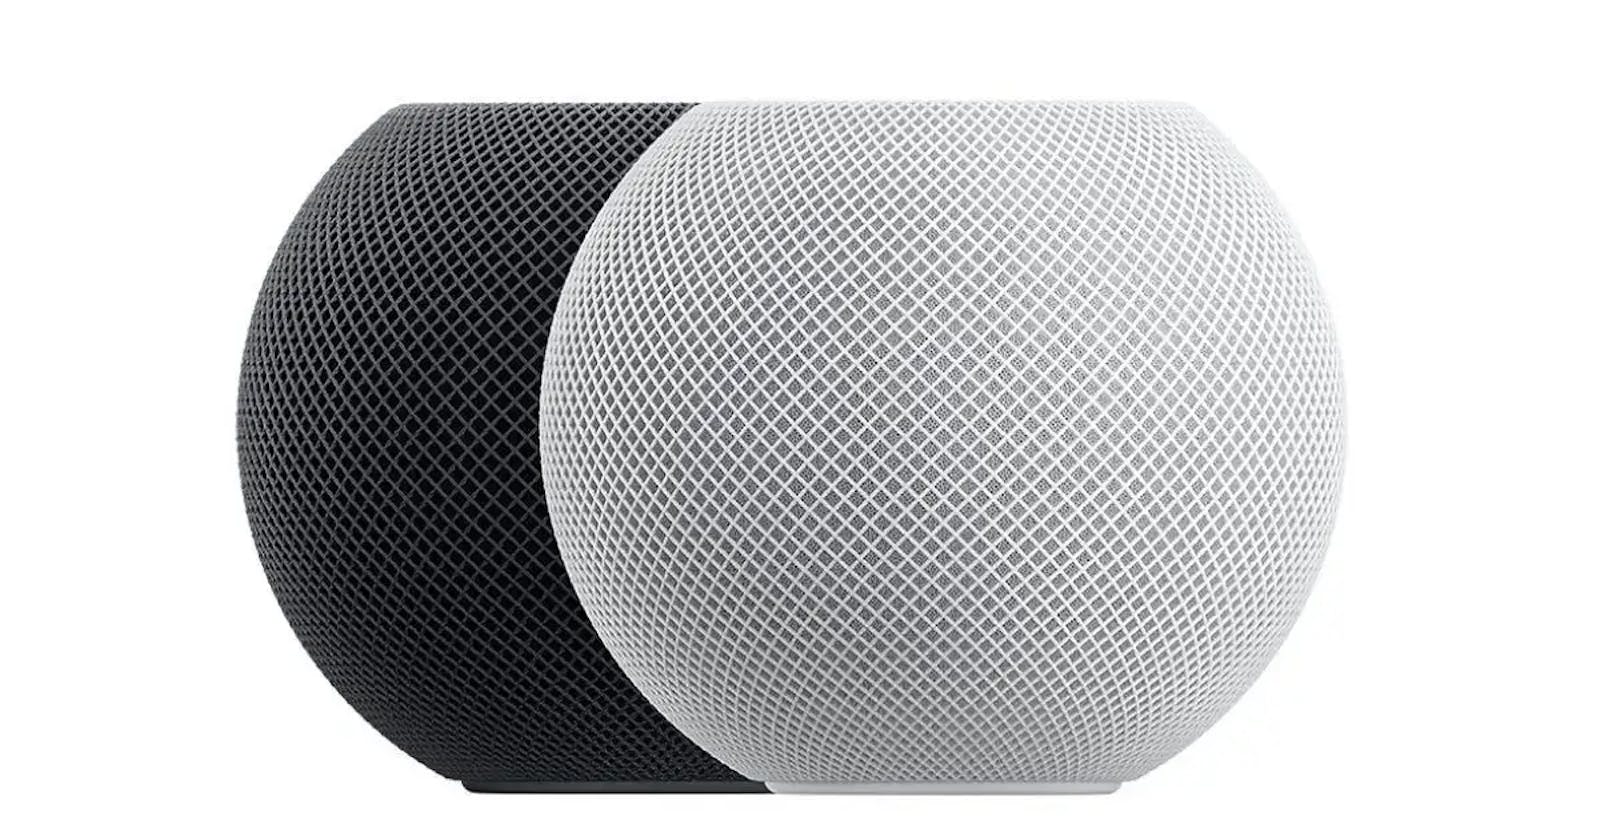 Apple May Not Be Working on a New Homepod Mini